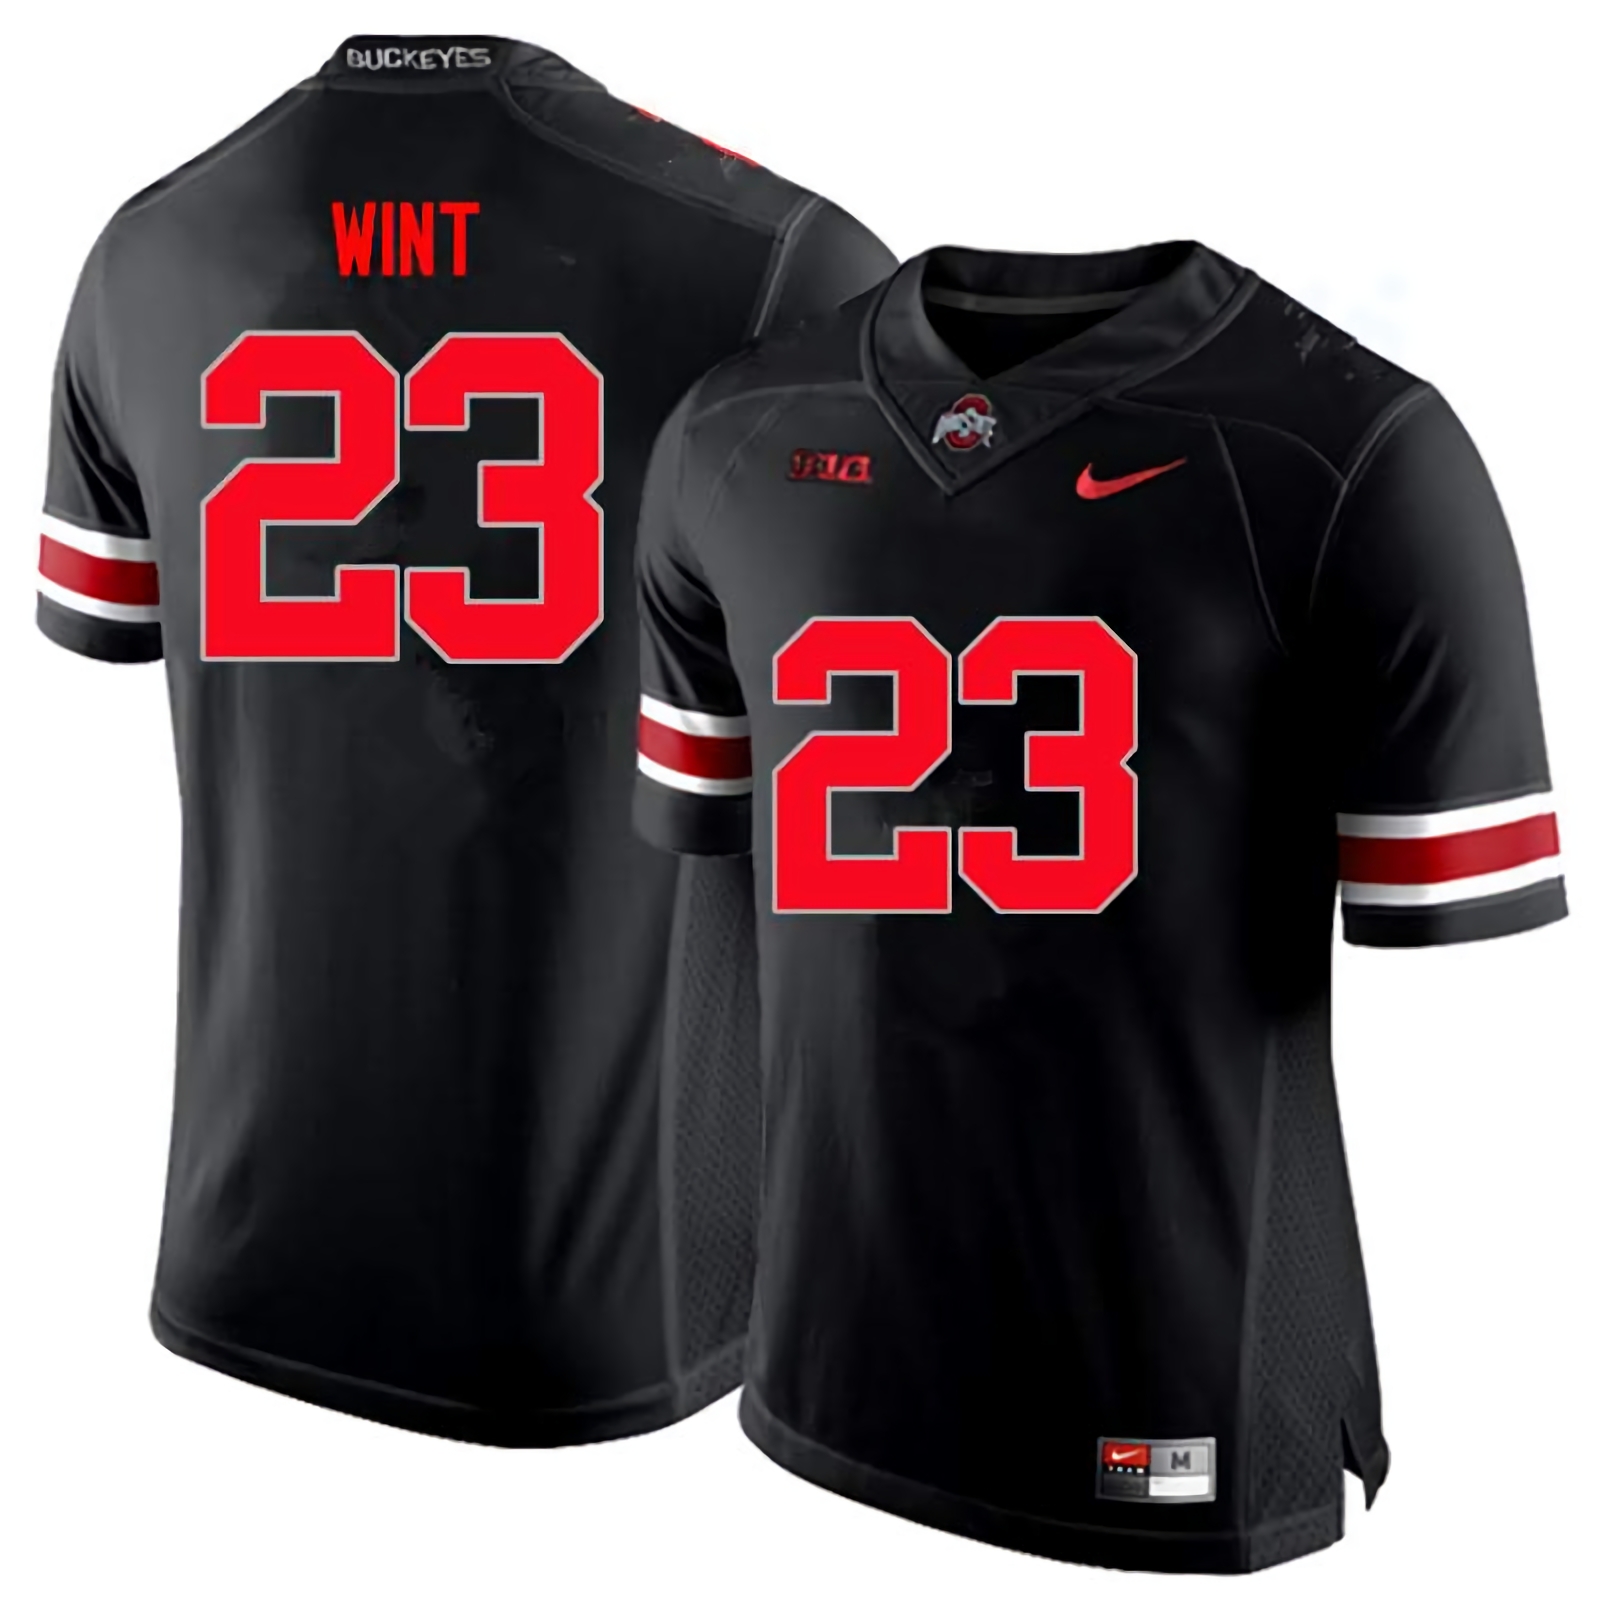 Jahsen Wint Ohio State Buckeyes Men's NCAA #23 Nike Black Limited College Stitched Football Jersey OBB3456RF